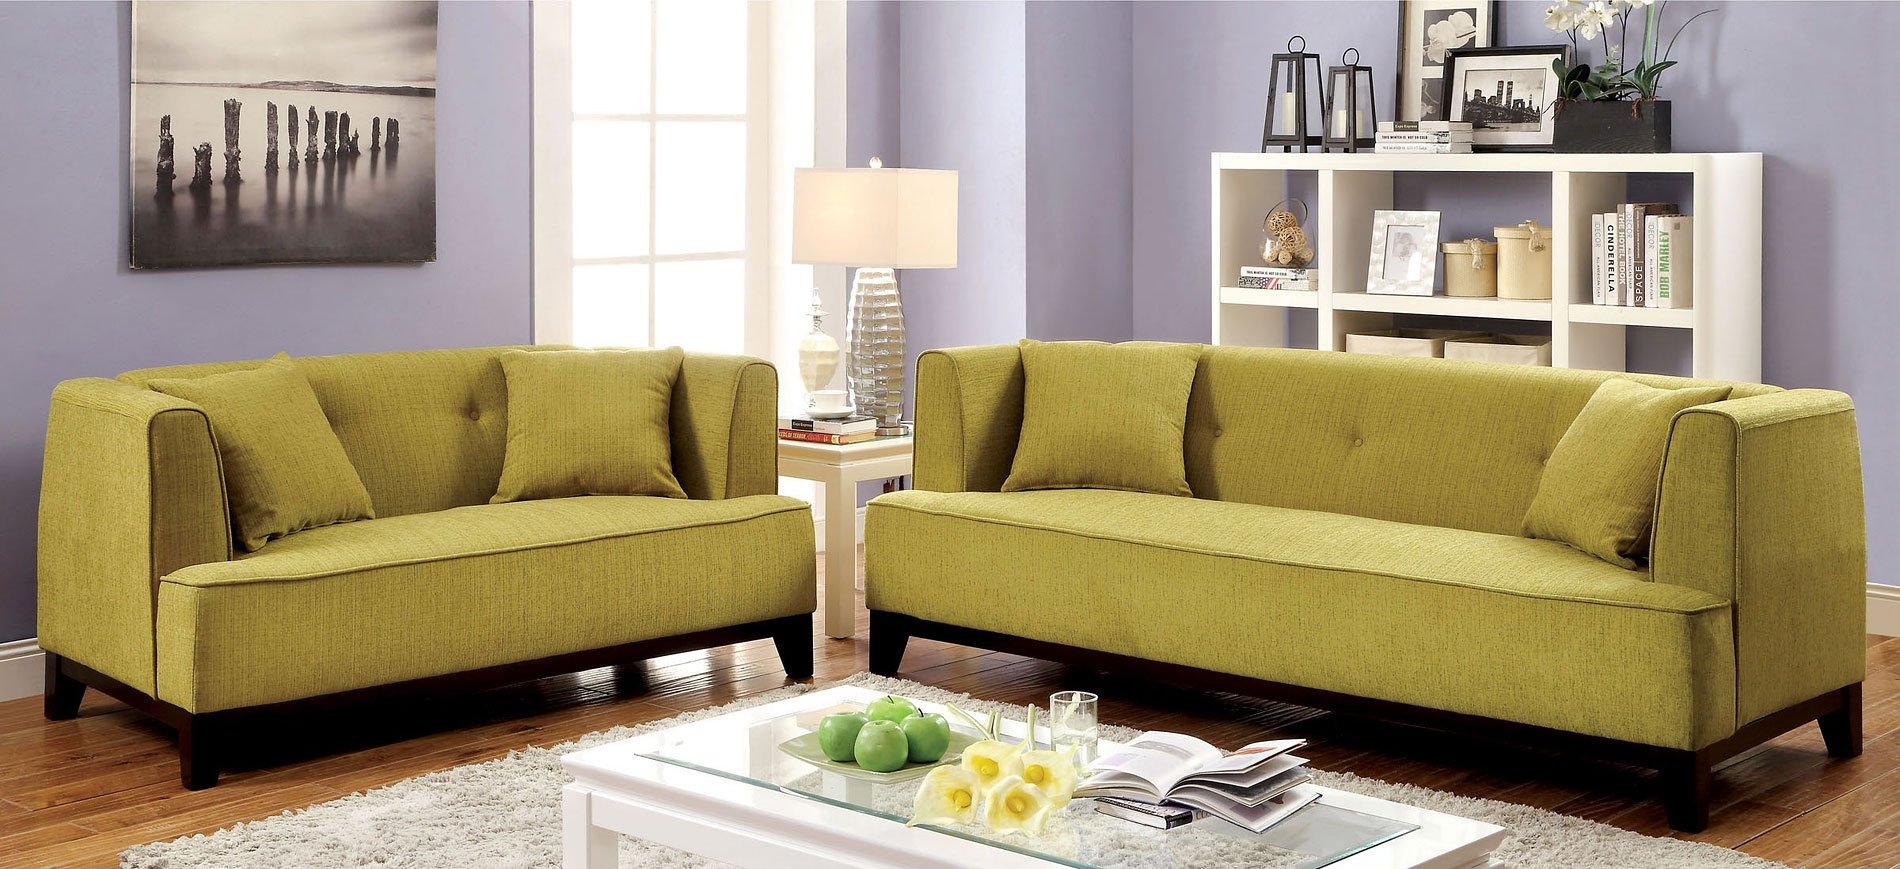 Yirume Living Room Collection